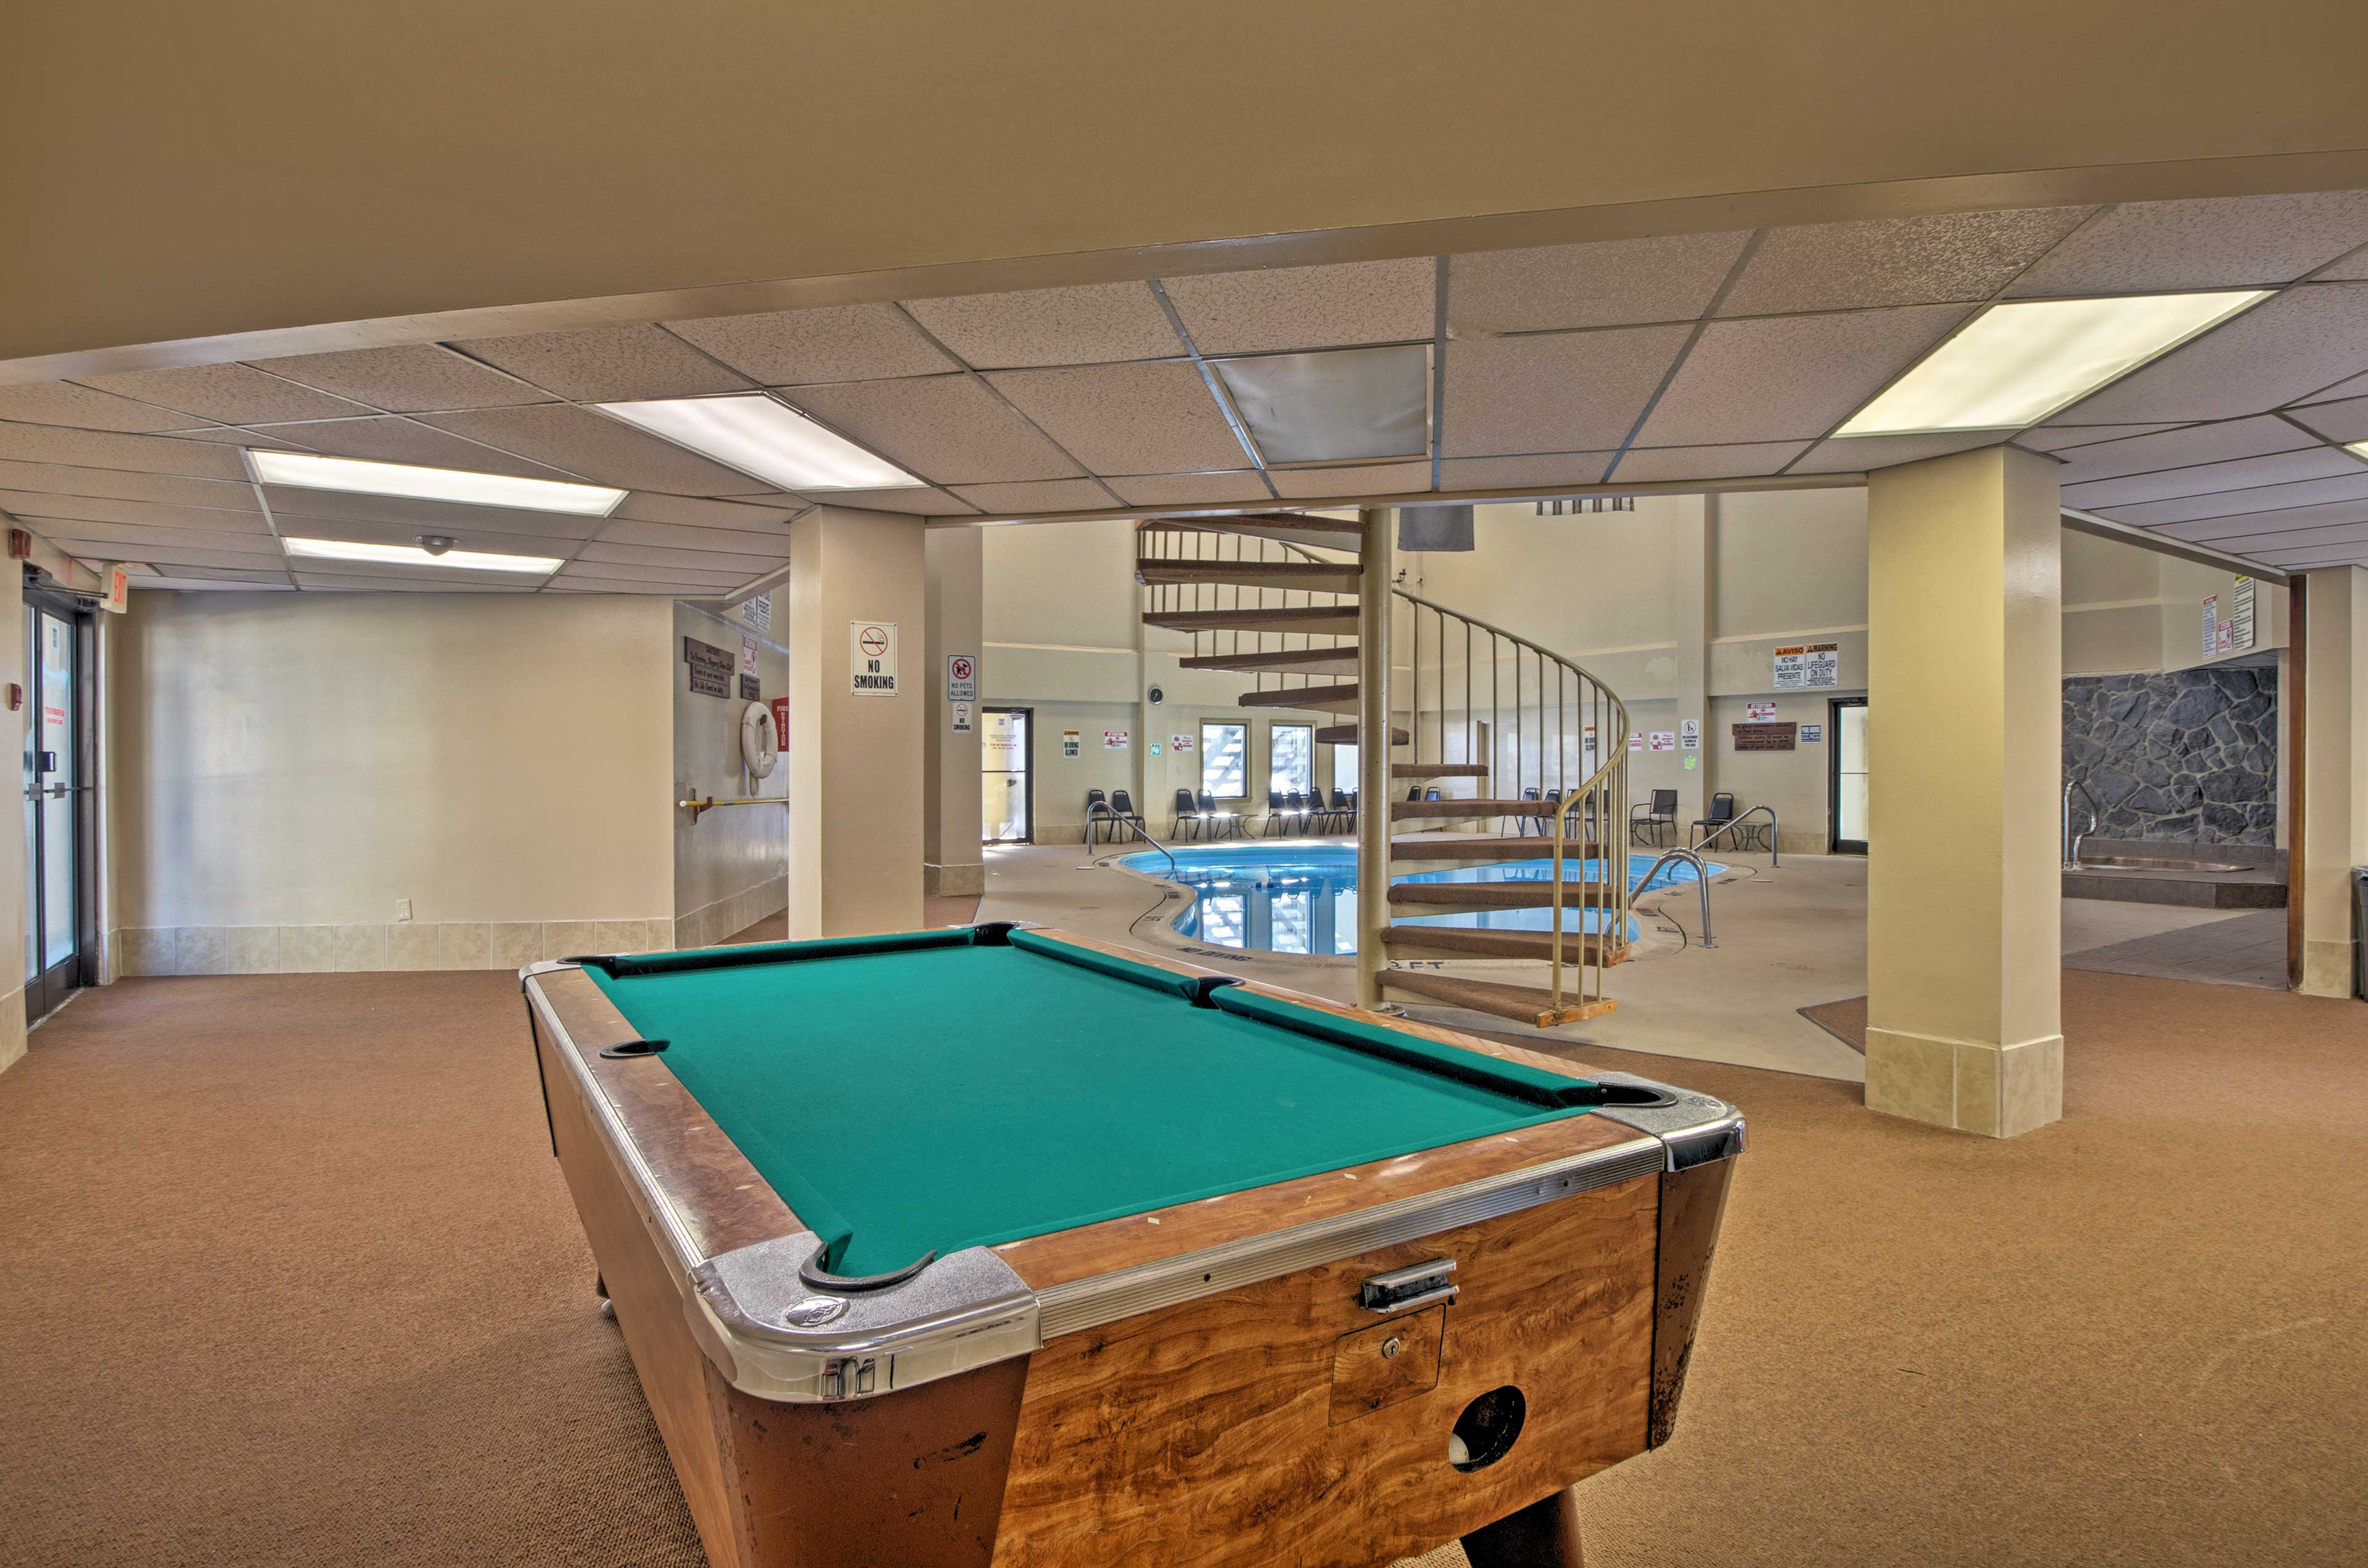 Community Amenities | Pool Table | Ping Pong Table